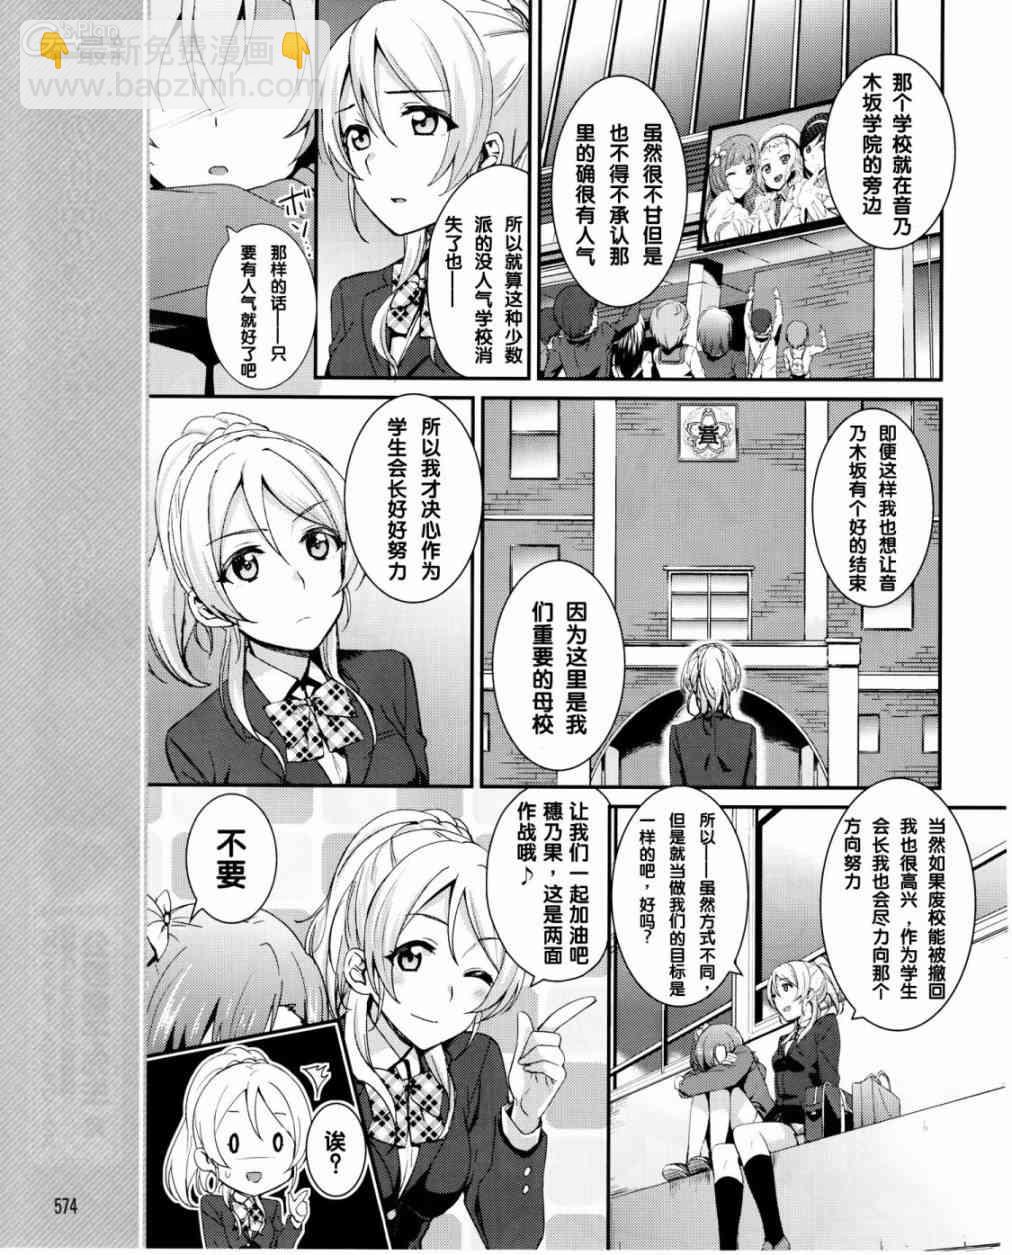 LoveLive - 16話 - 2